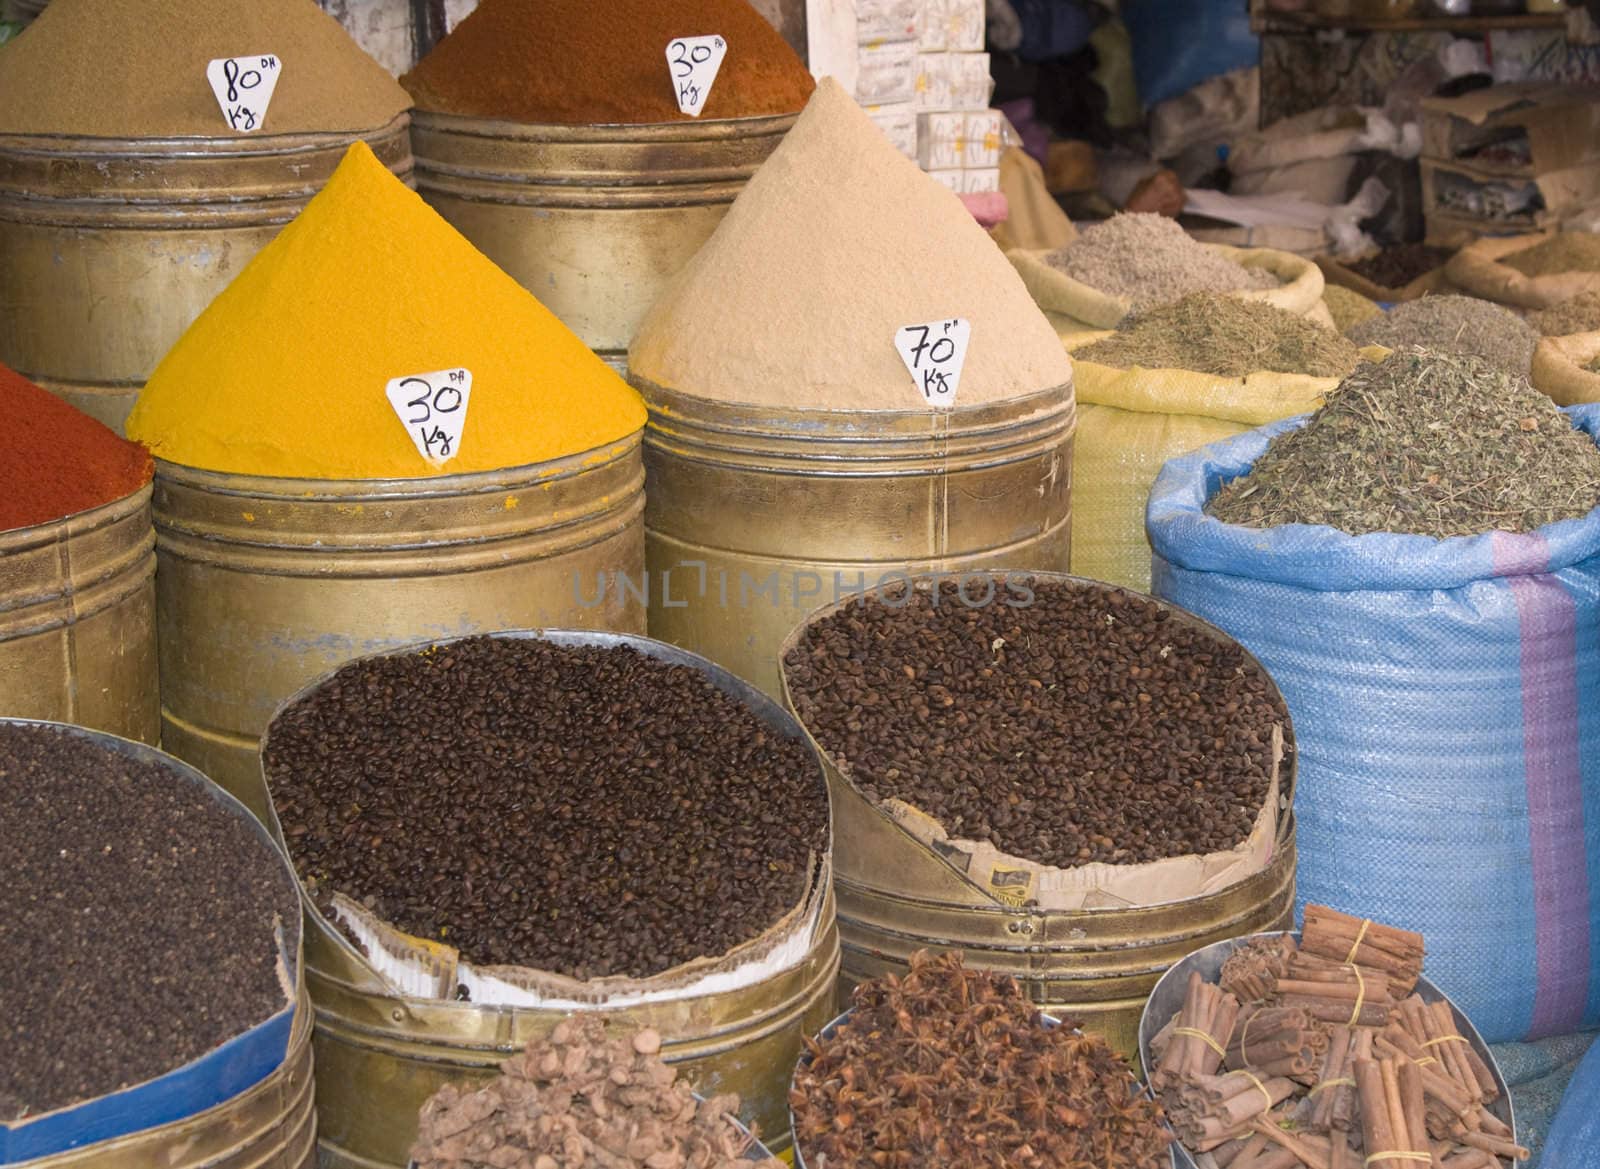 Containers of spices for sale in a shop in the historic heart of Marrakesh, Morocco